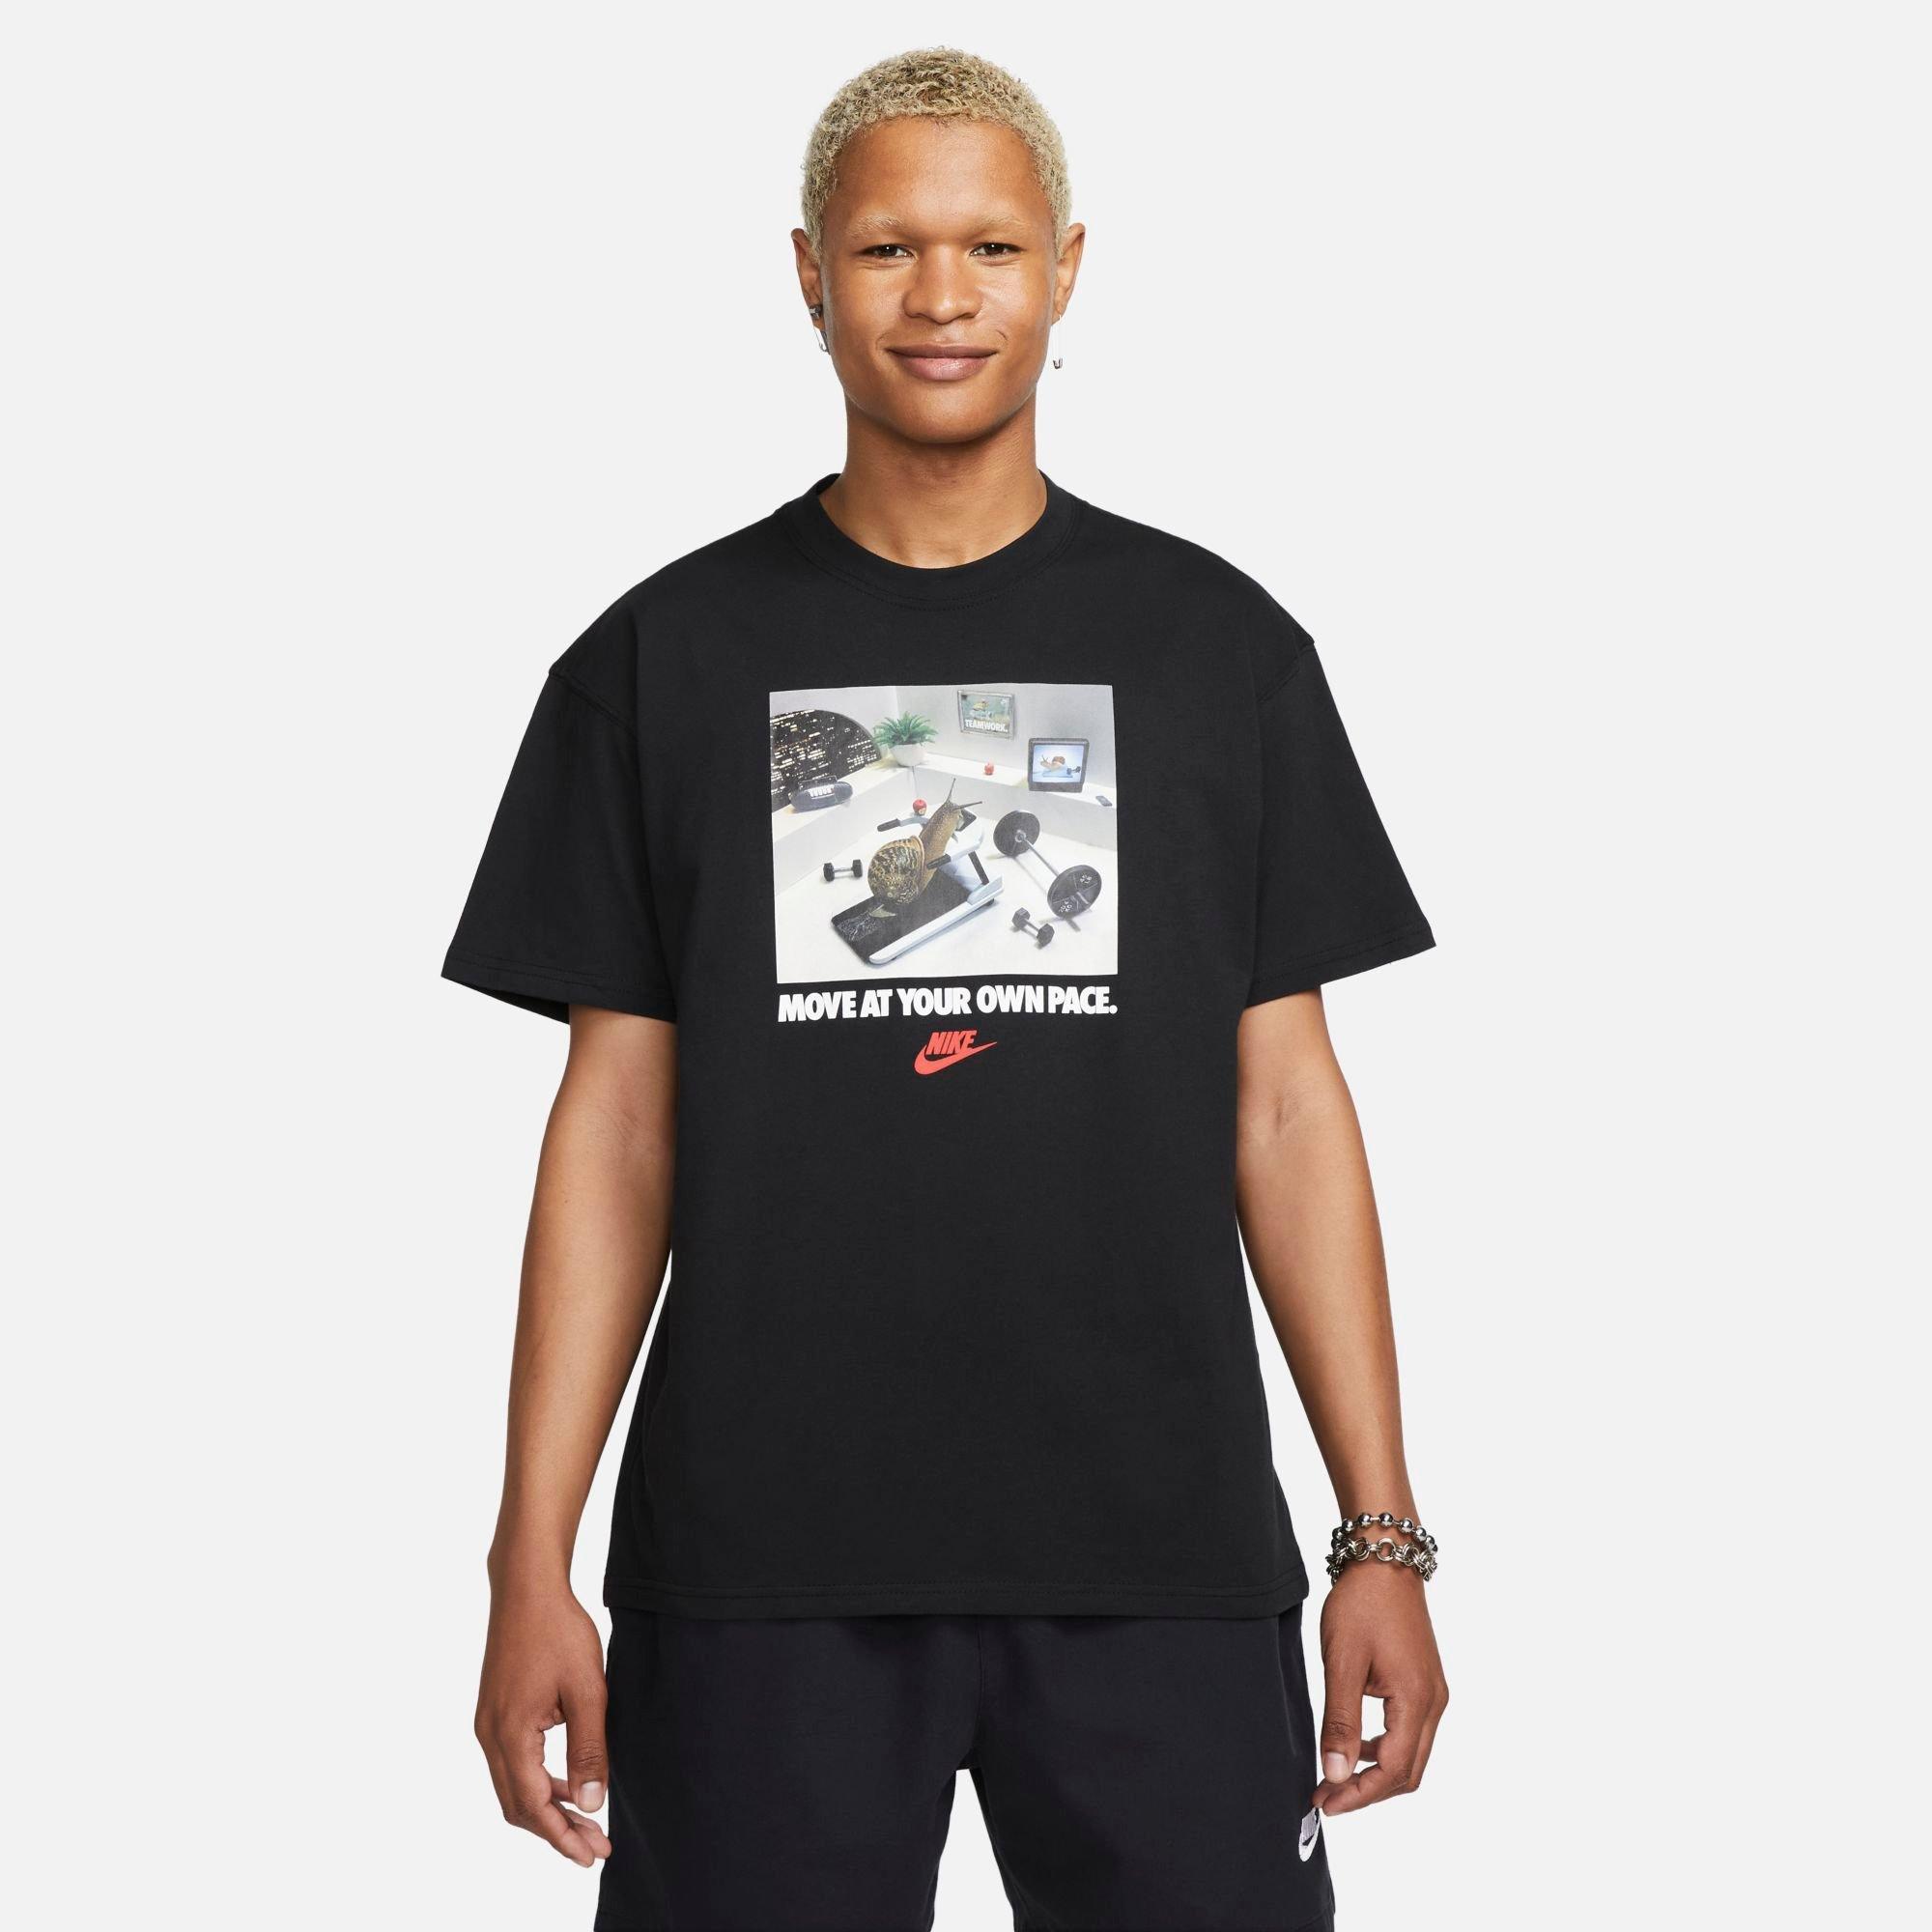 NIKE NIKE MEN'S SPORTSWEAR MAX90 AT YOUR PACE GRAPHIC T-SHIRT